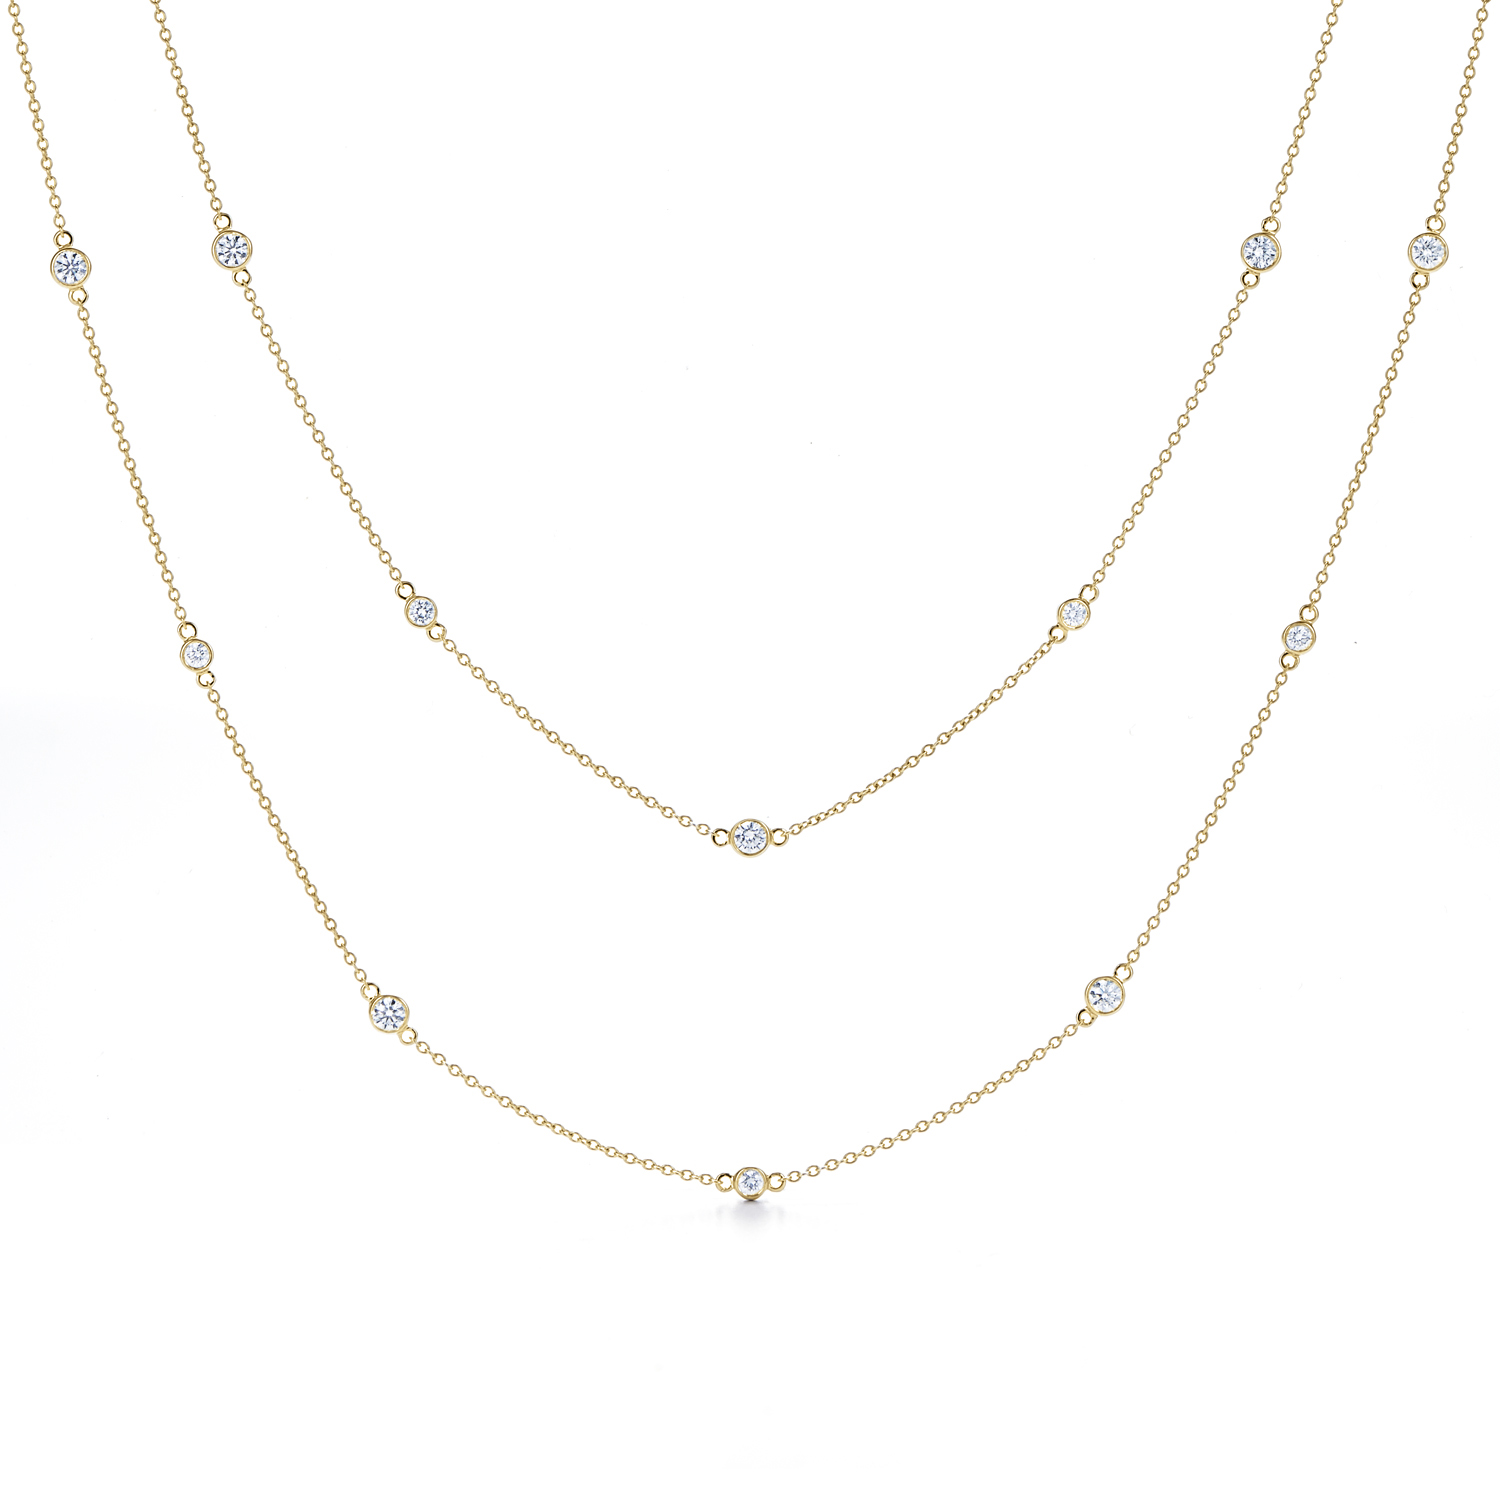 Diamond Strings Necklace, 36 Inches in 18K Yellow Gold | Kwiat